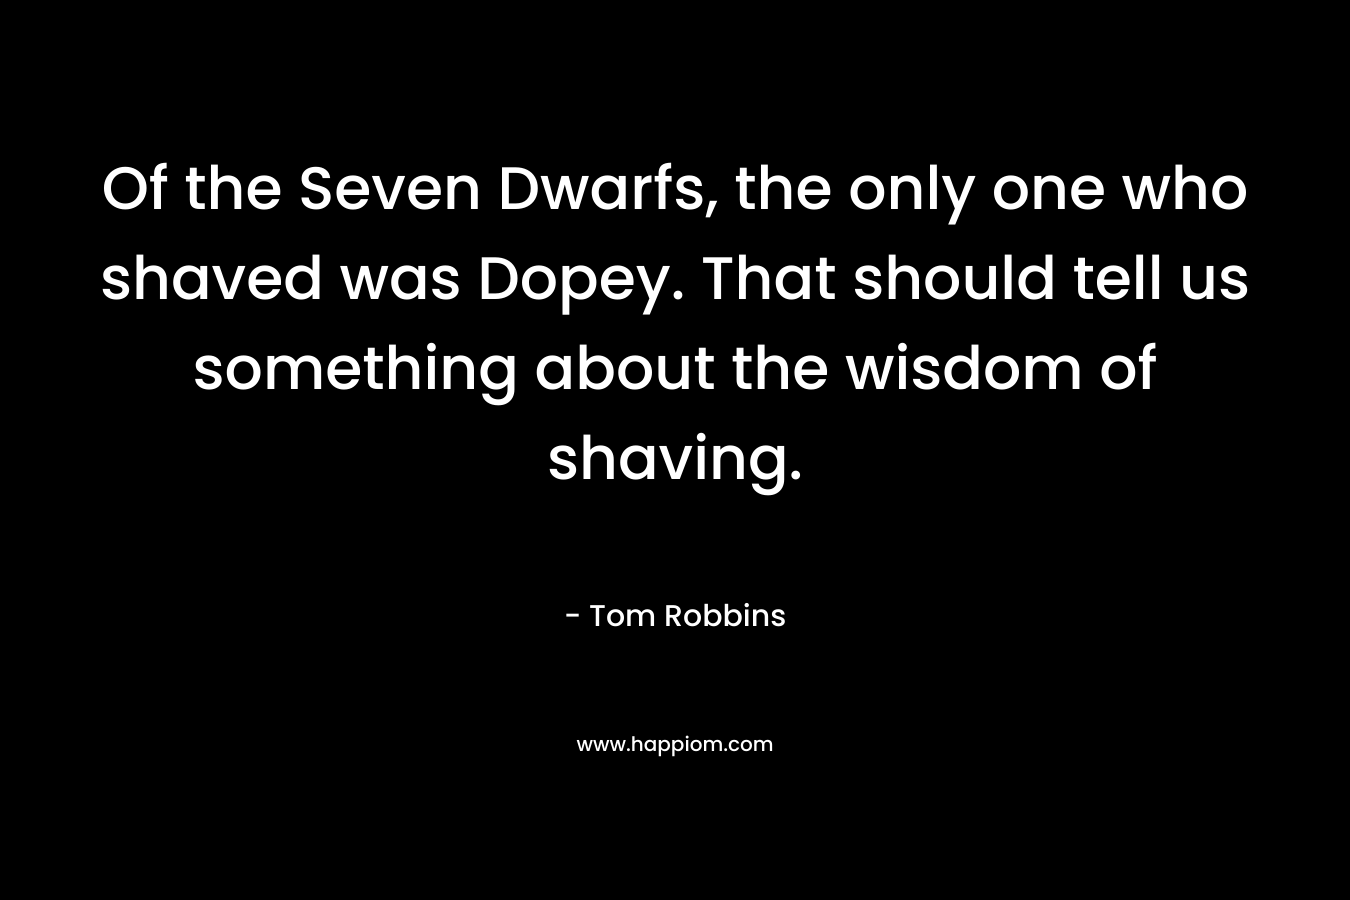 Of the Seven Dwarfs, the only one who shaved was Dopey. That should tell us something about the wisdom of shaving. – Tom Robbins